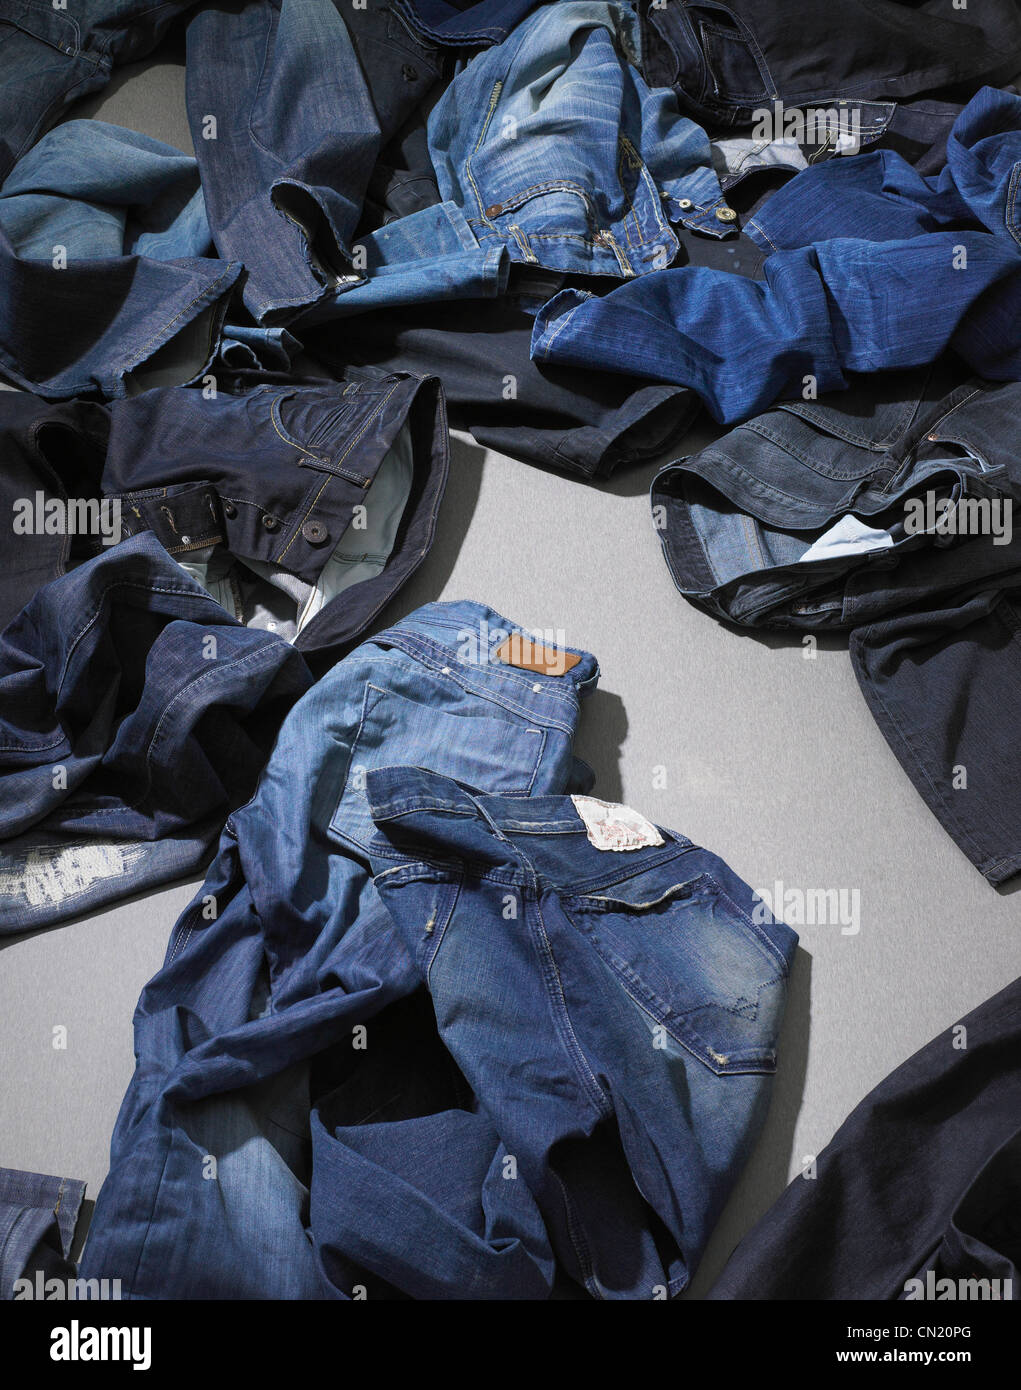 Pile of blue jeans Stock Photo